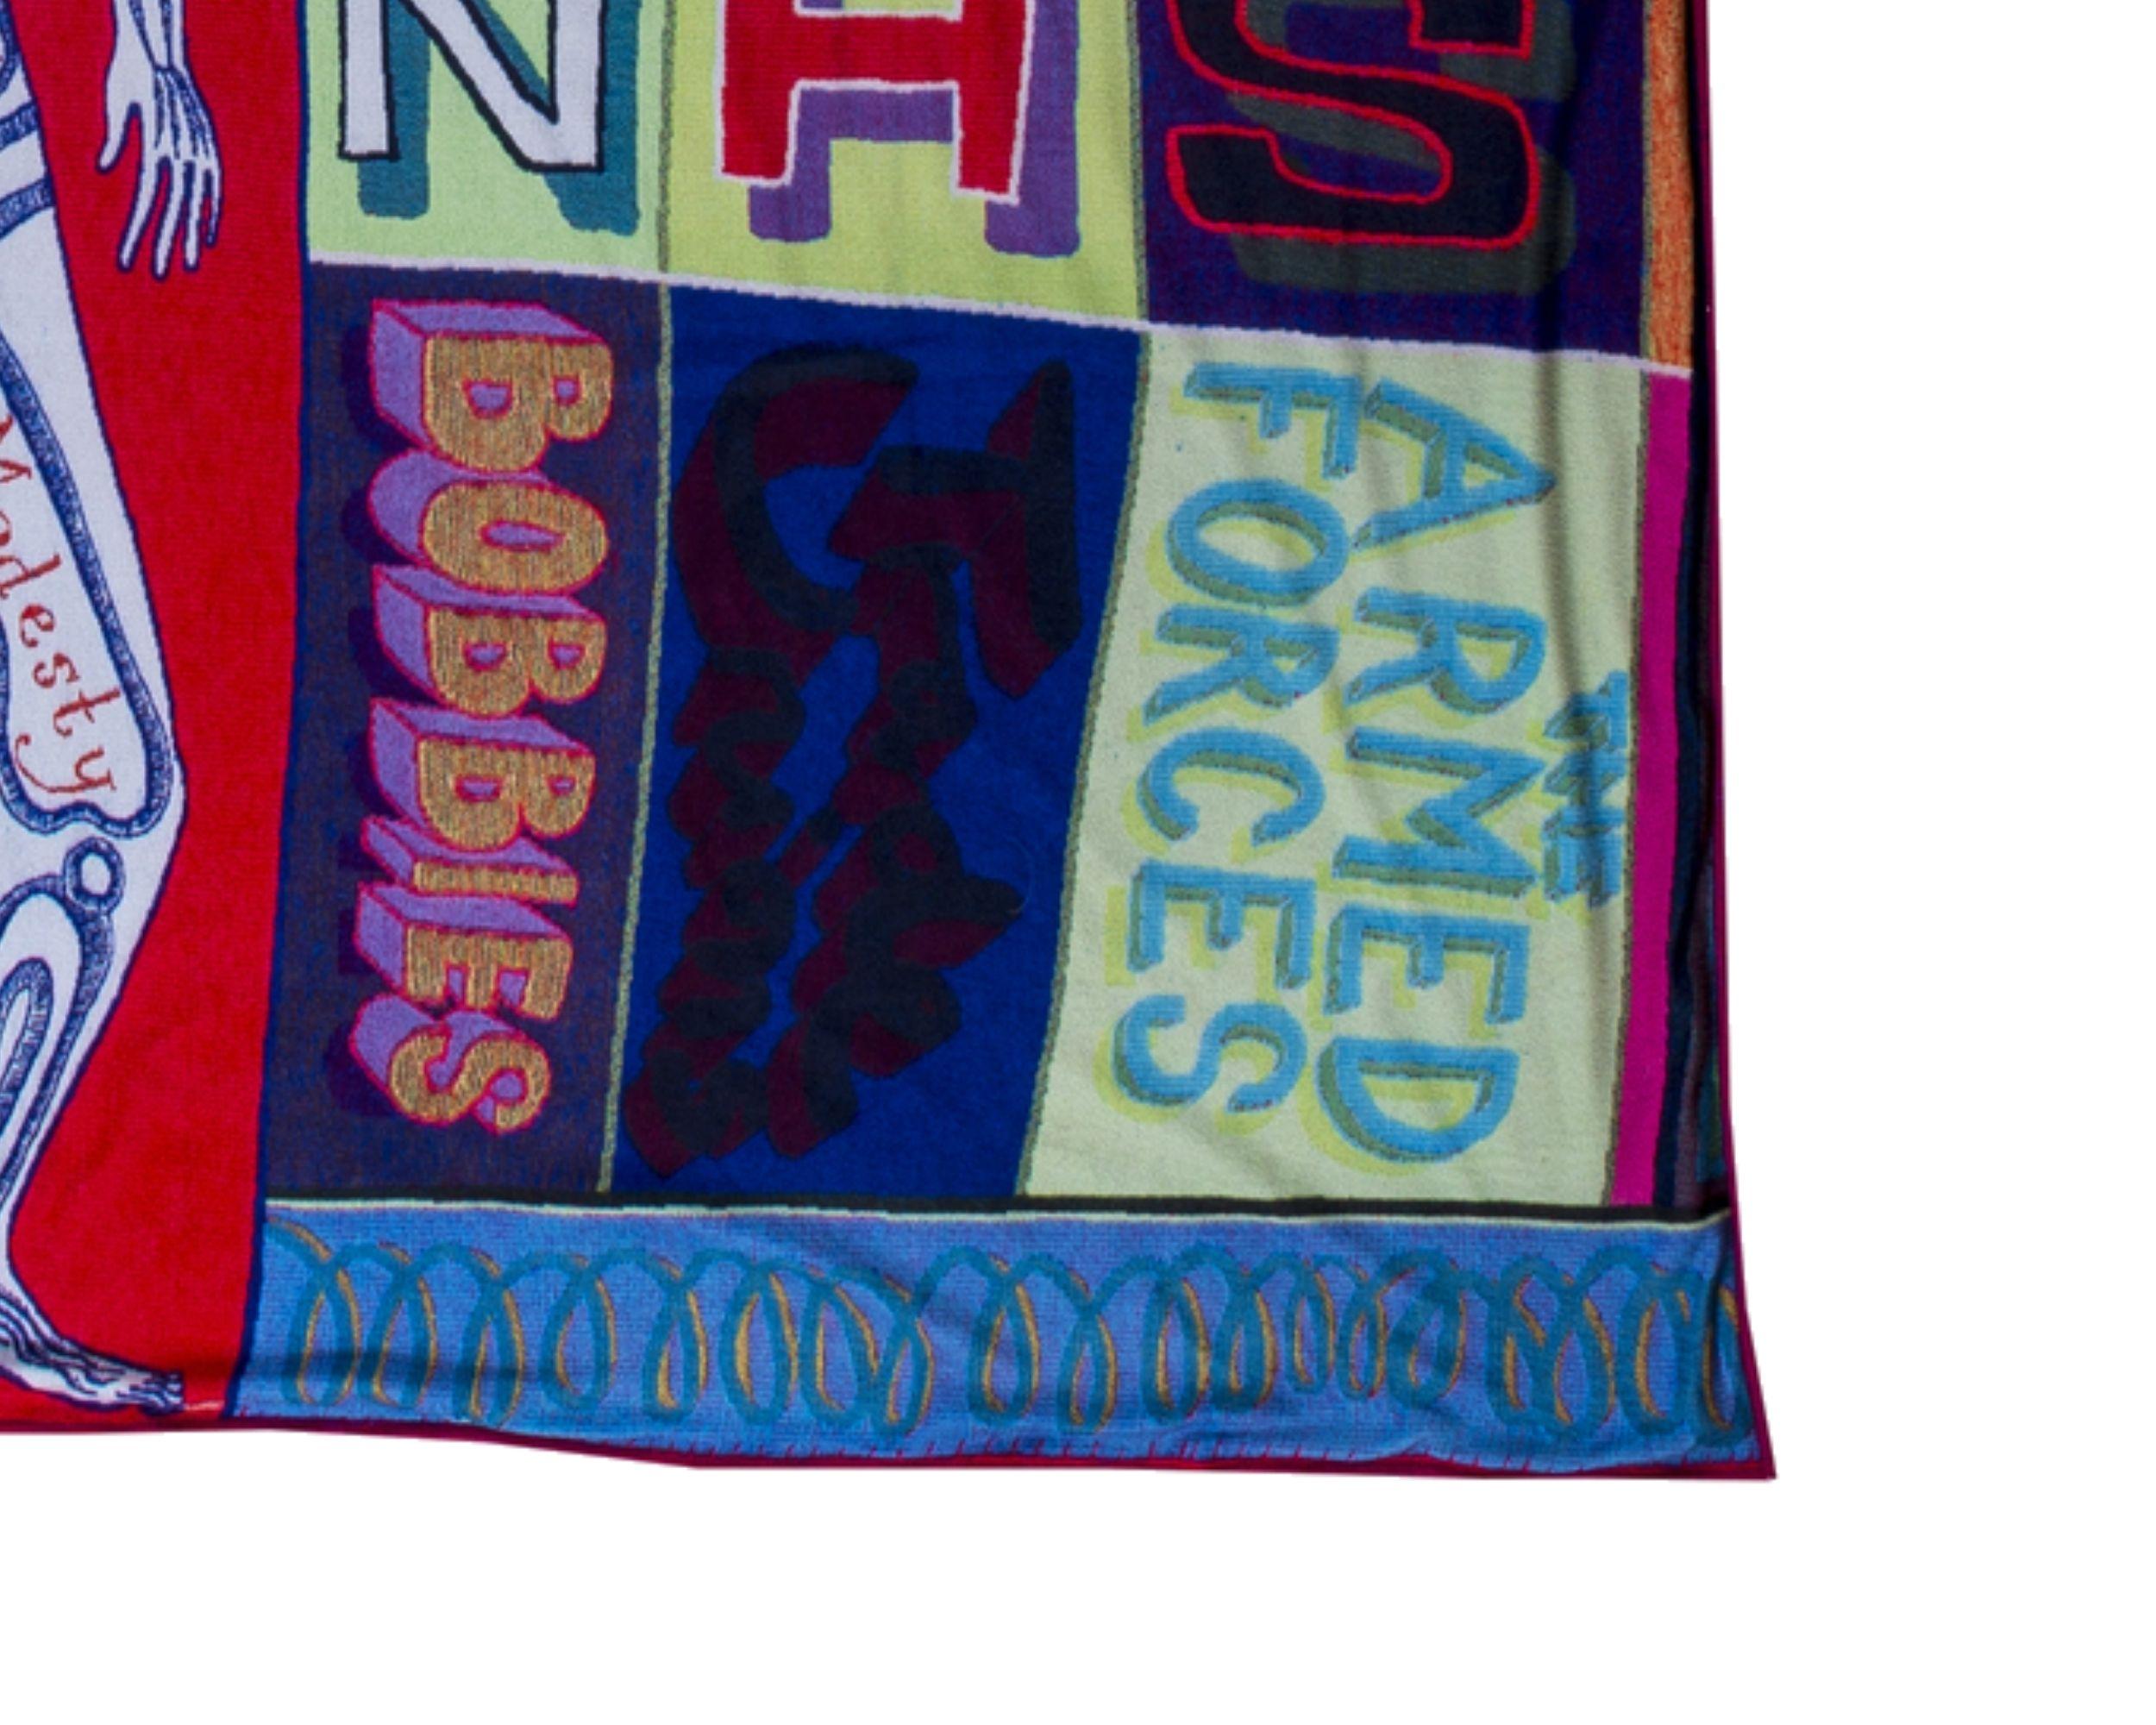 GRAYSON PERRY
Comfort Blanket, 2014
Blanket printed in colours
With the artist's woven monogramme on a label verso
From the edition of circa 50
Produced by Kit Grover Retail Culture
Published by the National Portrait Gallery, London
Multiple: 172.0